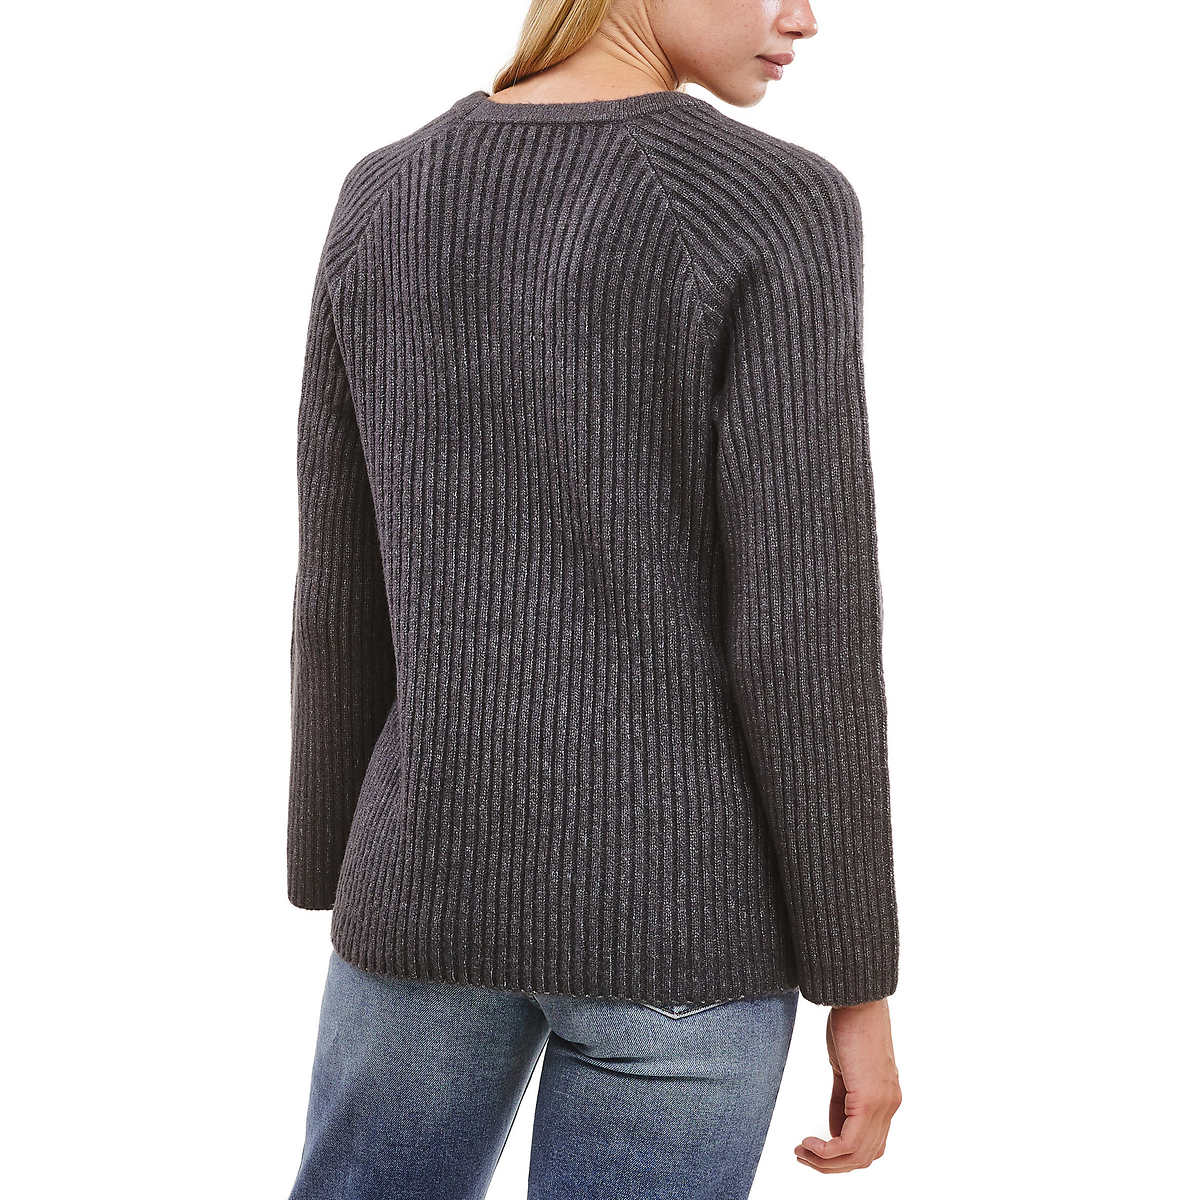 Fever Women's Bell Sleeve Soft Marled Ribbed Knit Crewneck Sweater